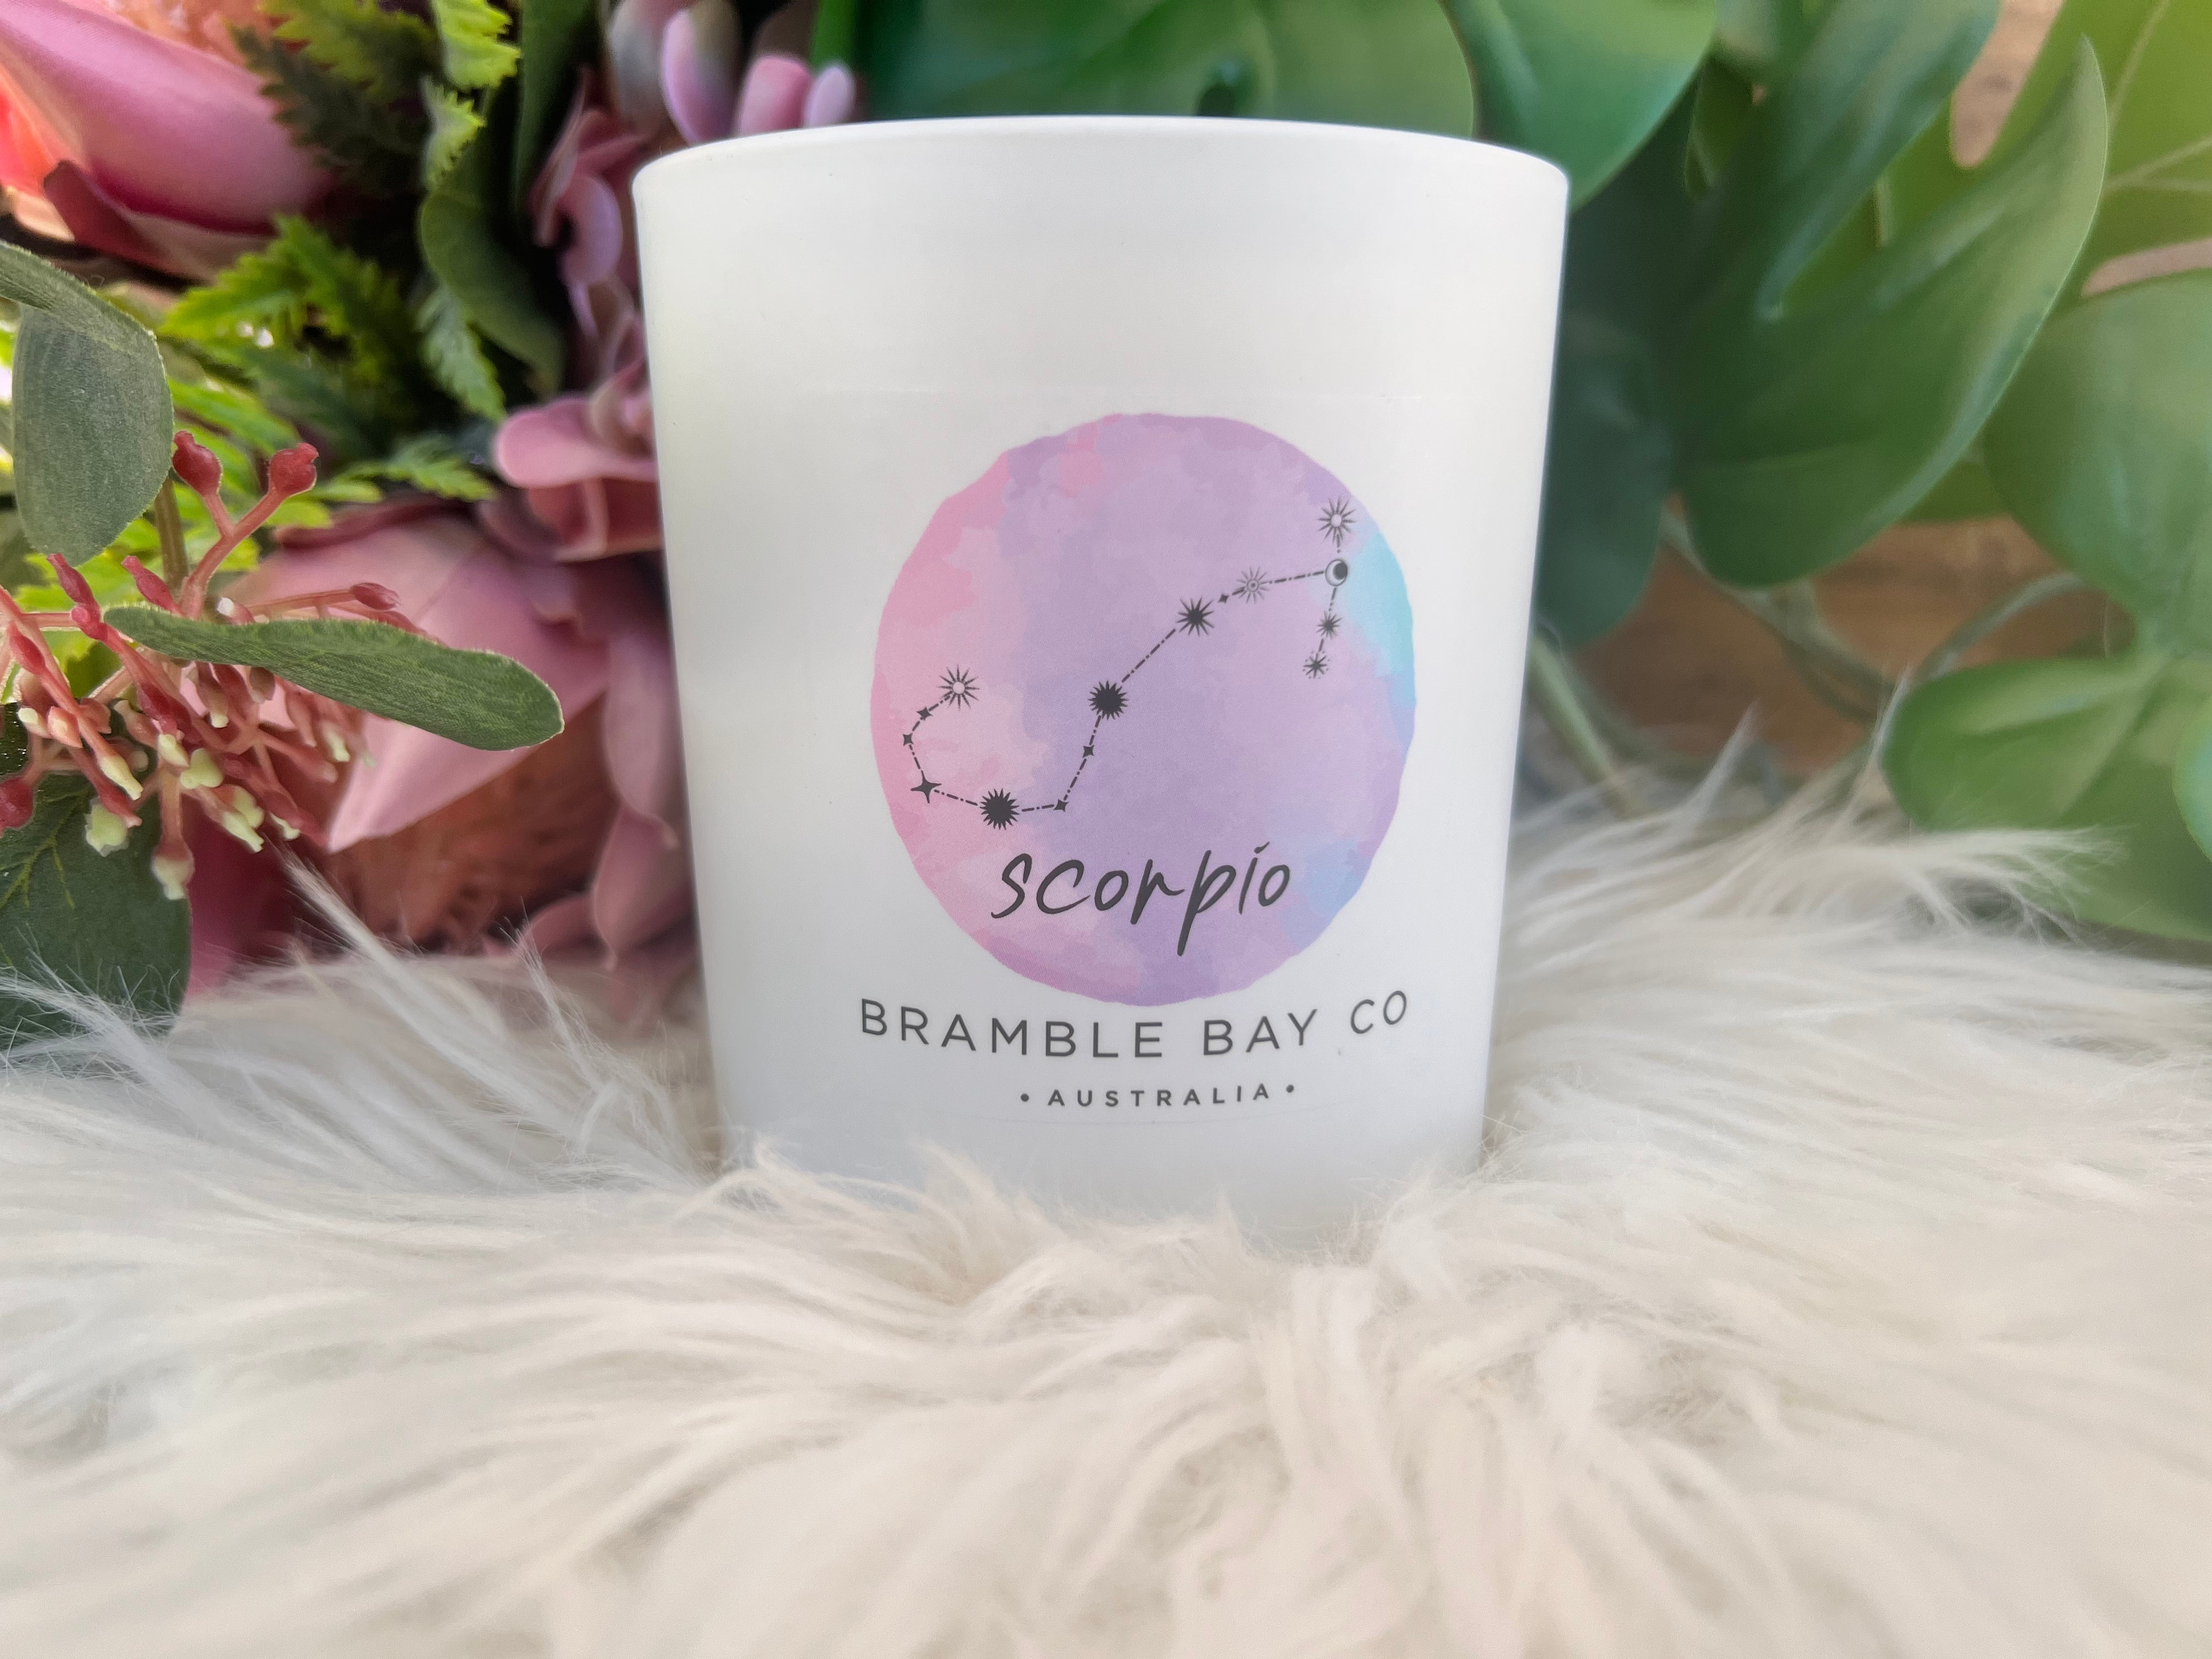 Scorpio Zodiac Scented Candle Bramble Bay - Muse Crystals & Mystical Gifts